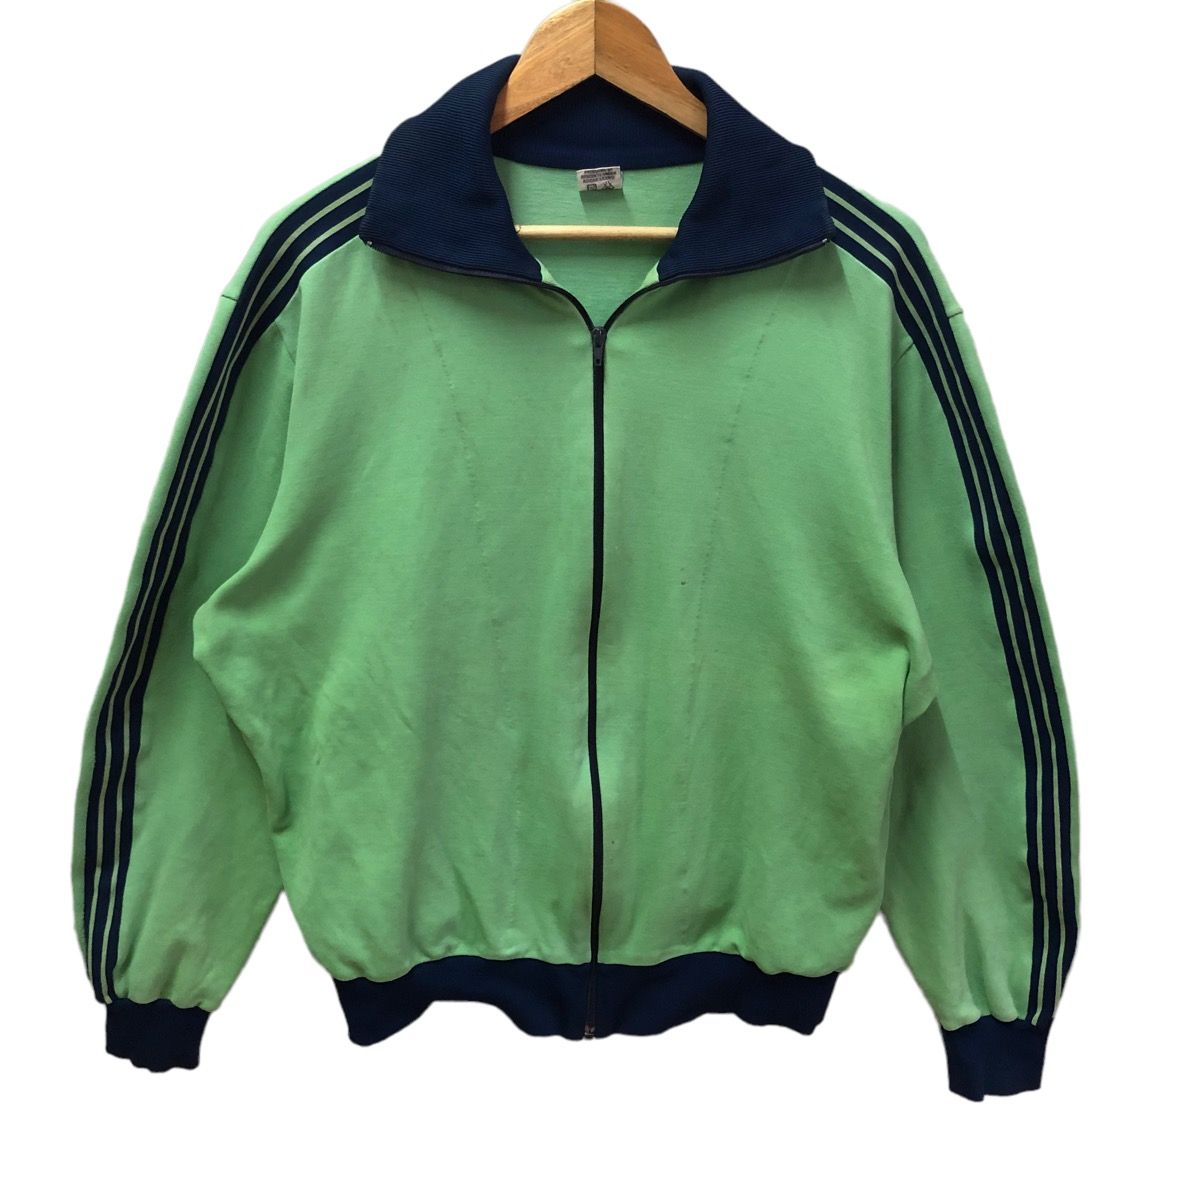 Vintage 90s adidas track jacket size 6 made in japan - 1